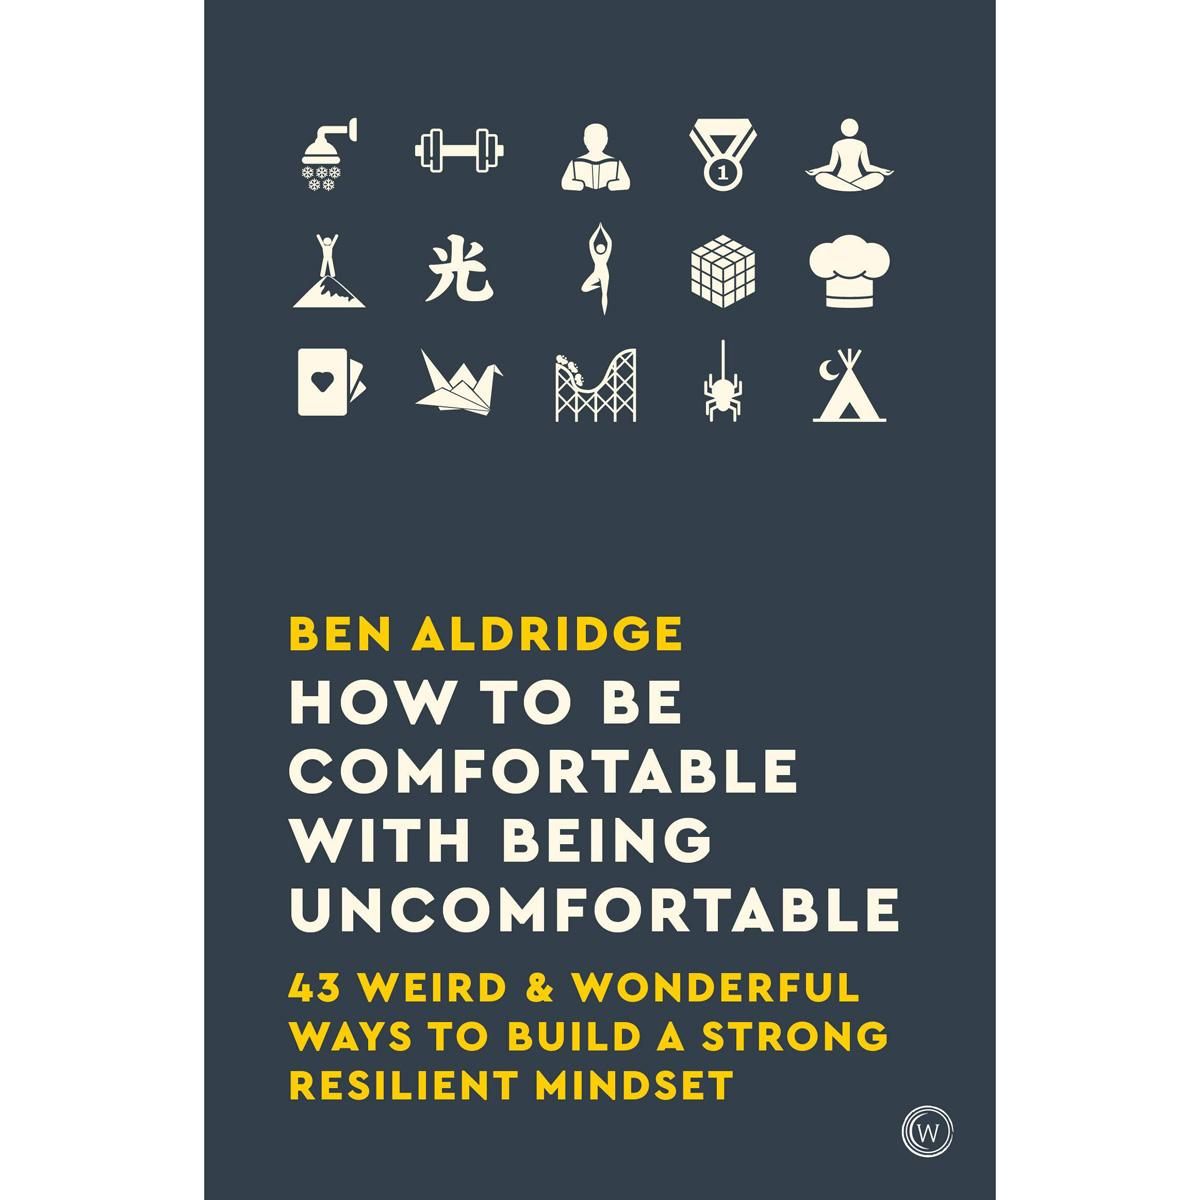 How to Be Comfortable with Being Uncomfortable eBook for $0.99